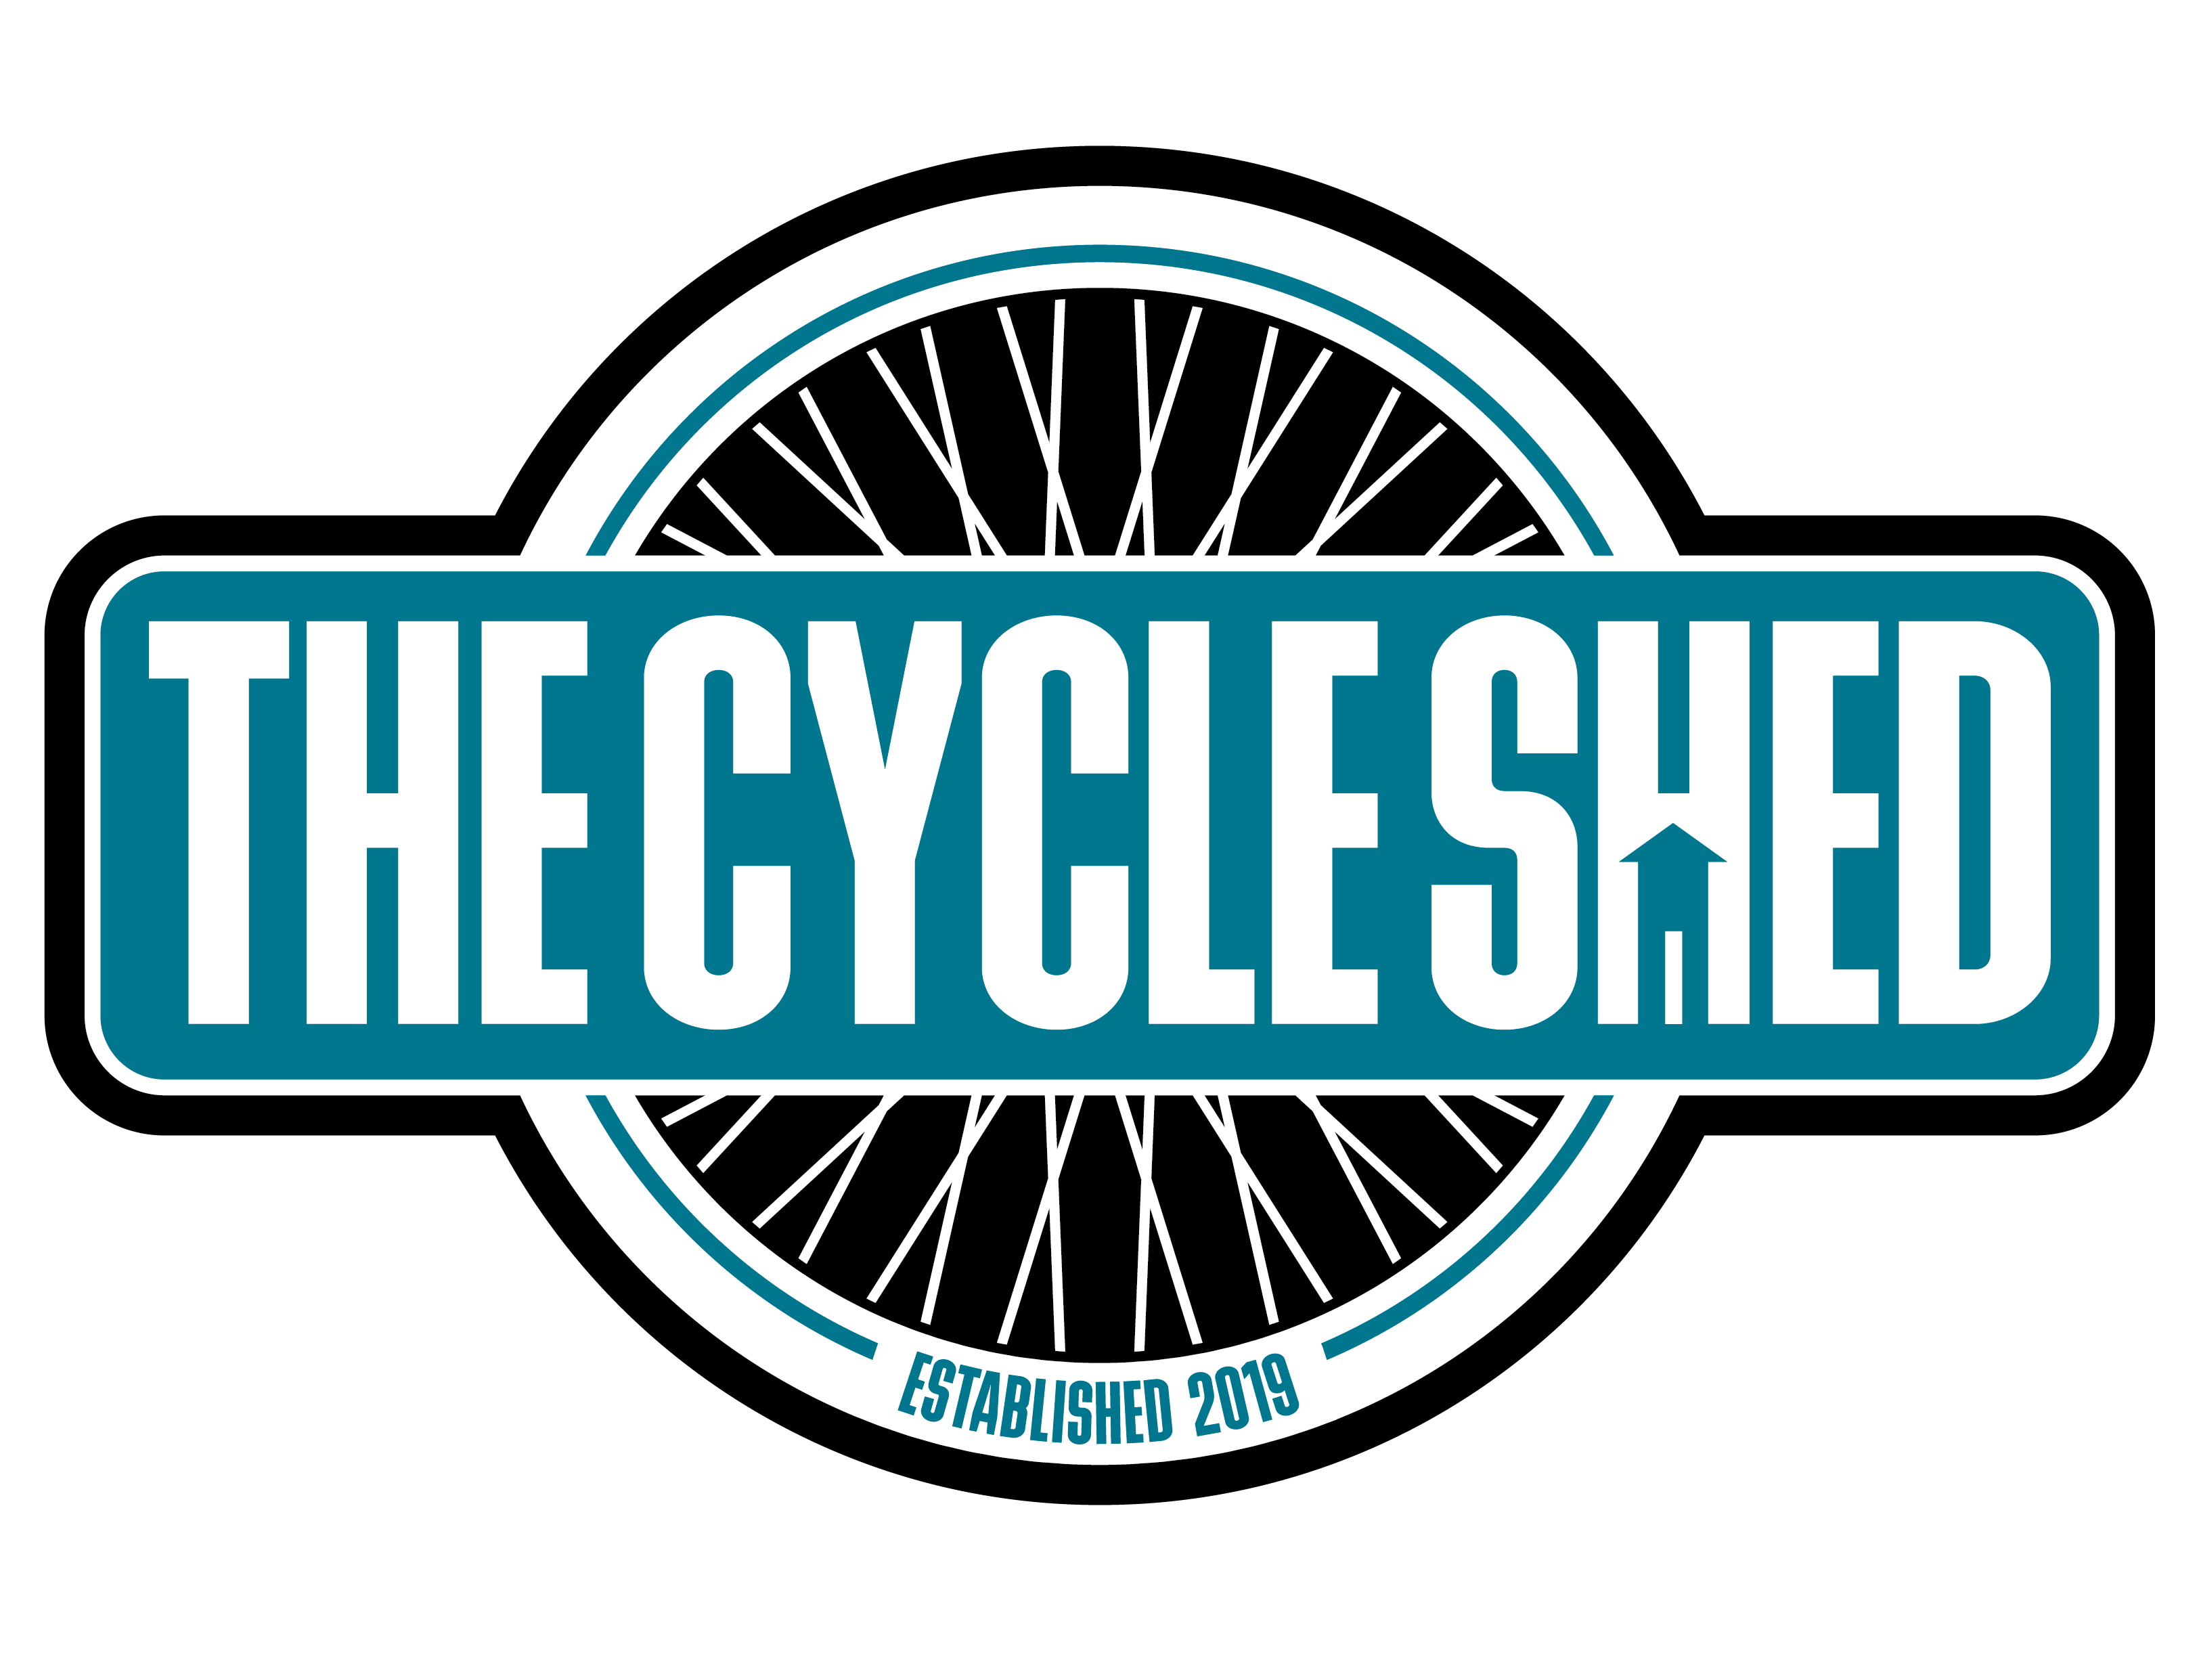 THE CYCLE SHED